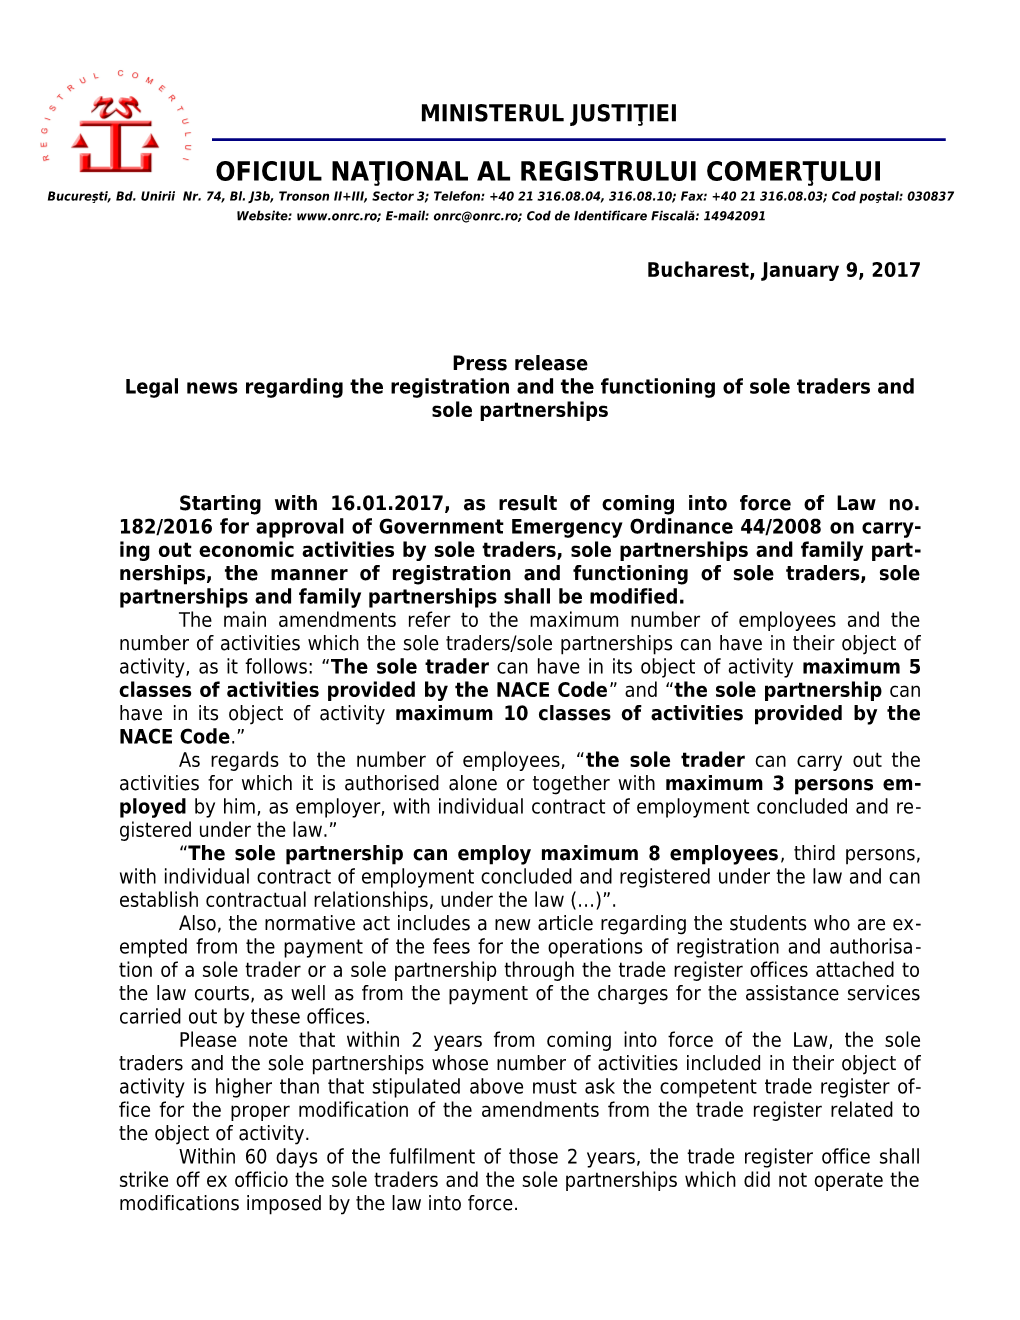 Legal News Regarding the Registration and the Functioning of Sole Traders and Sole Partnerships